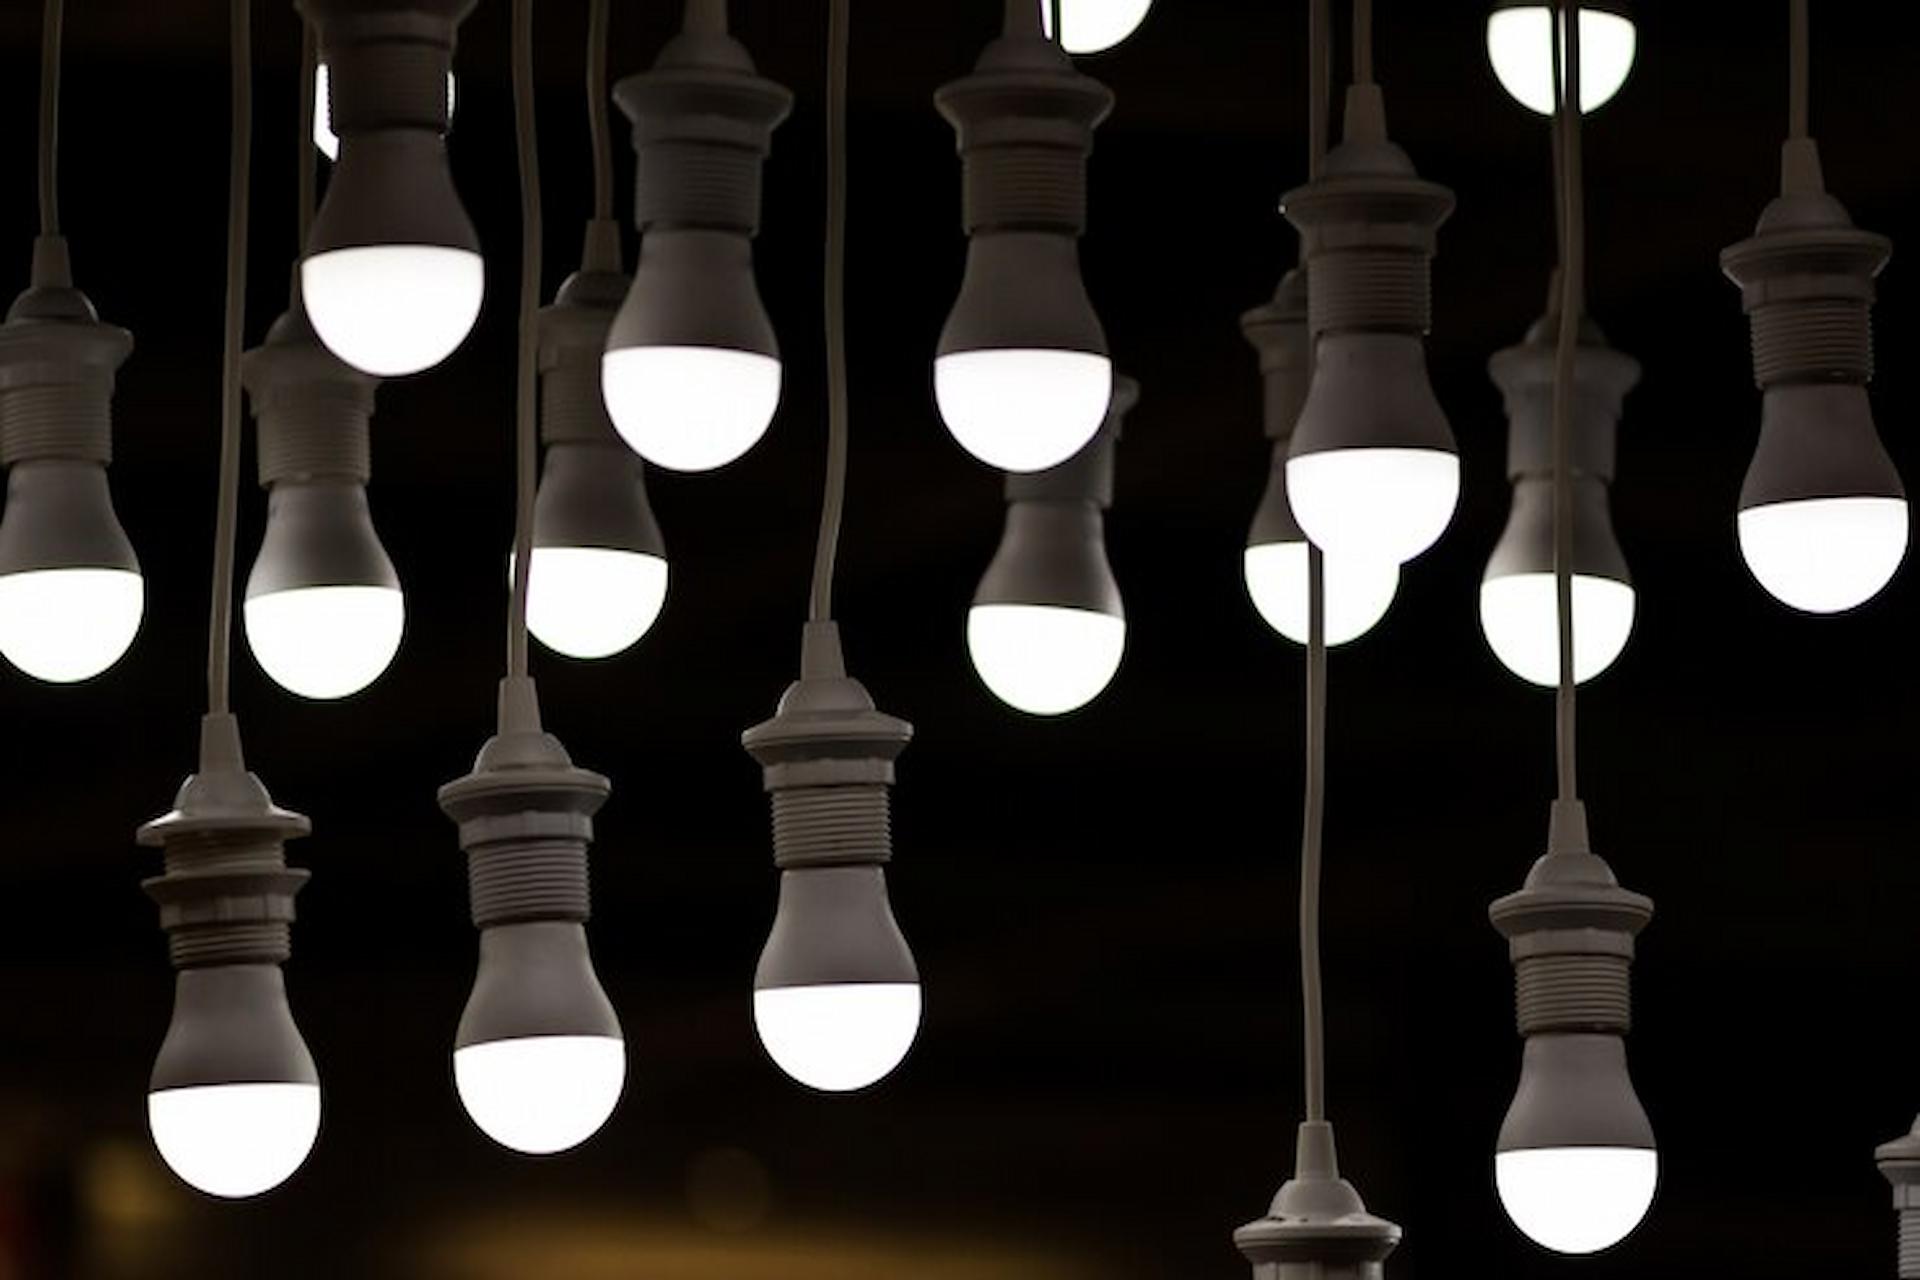 Custom-made LED light fixtures: What it is, benefits and where it is used